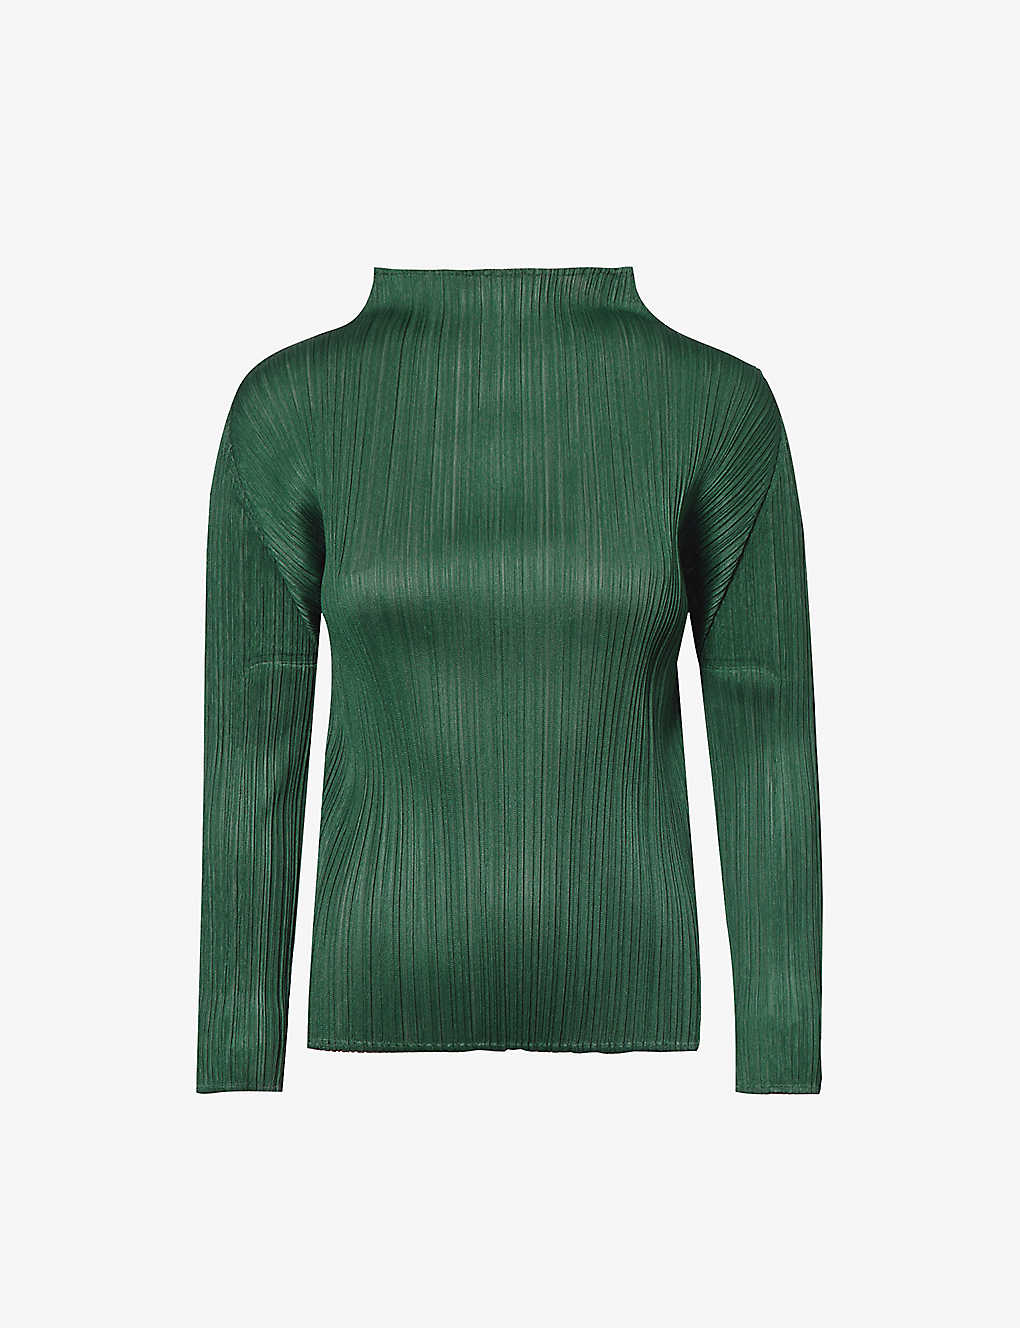 Issey Miyake Pleats Please  Womens Dark Green Colourful High-neck Knitted Top